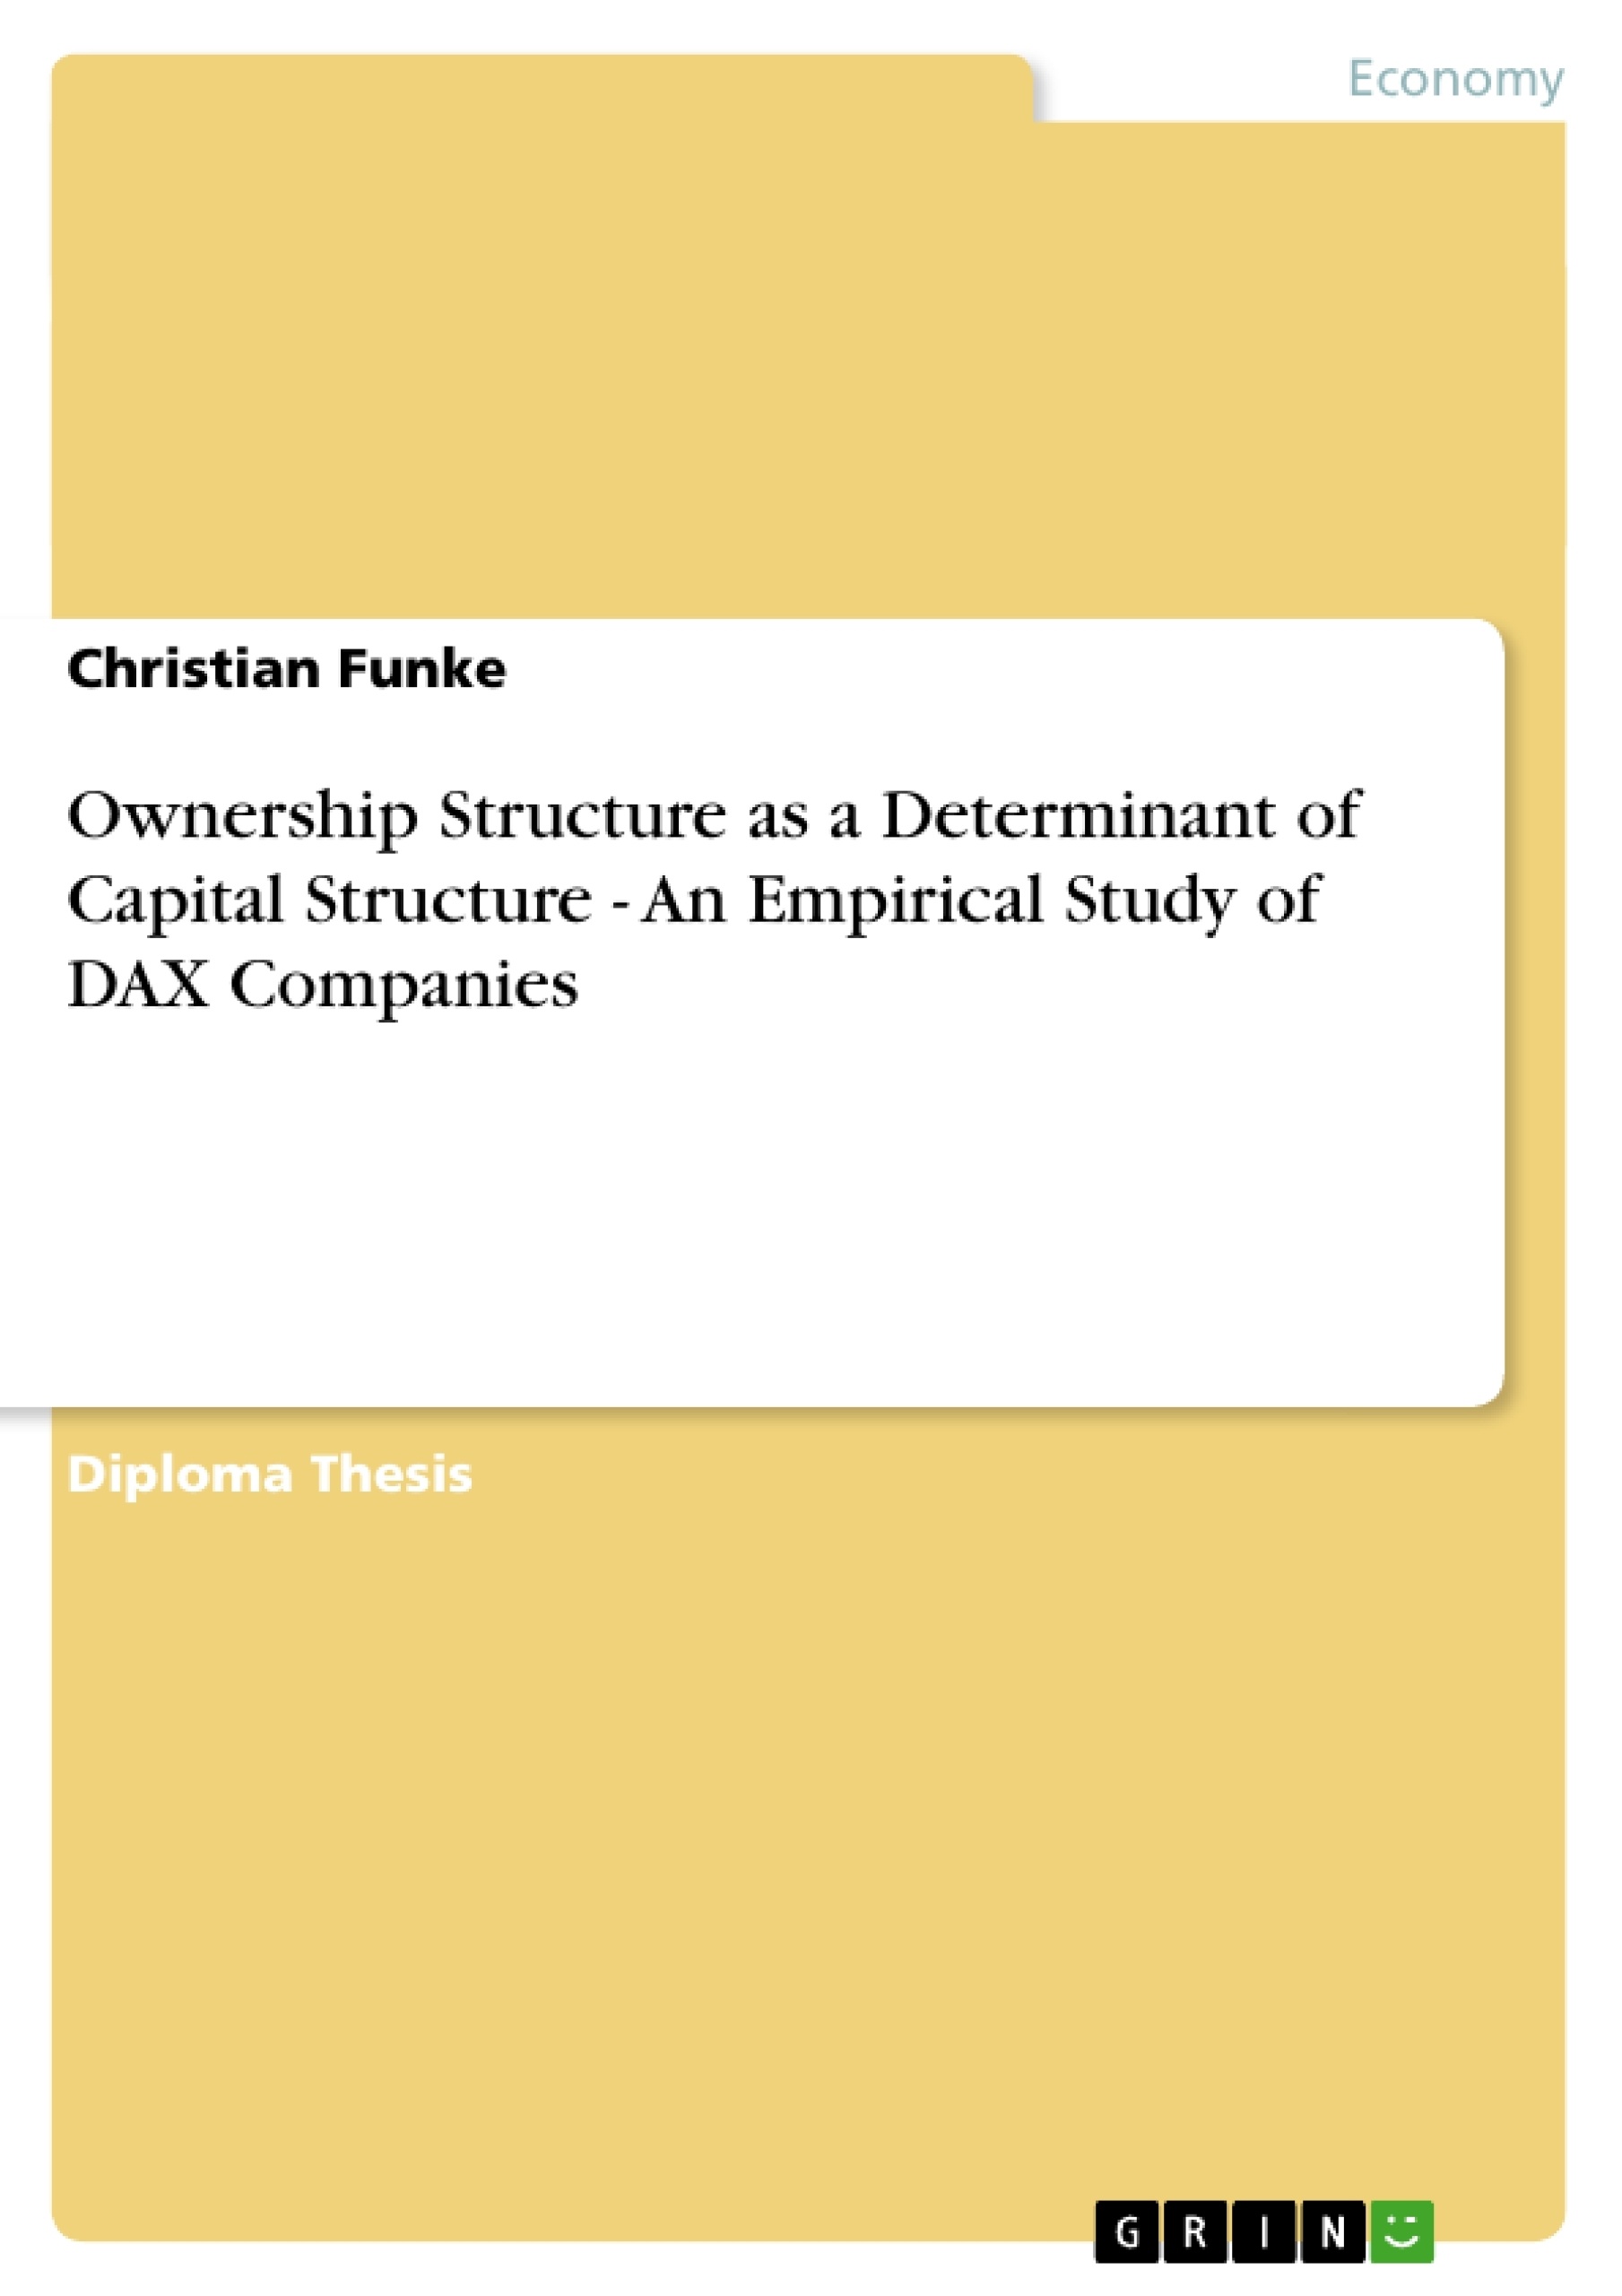 Título: Ownership Structure as a Determinant of Capital Structure - An Empirical Study of DAX Companies